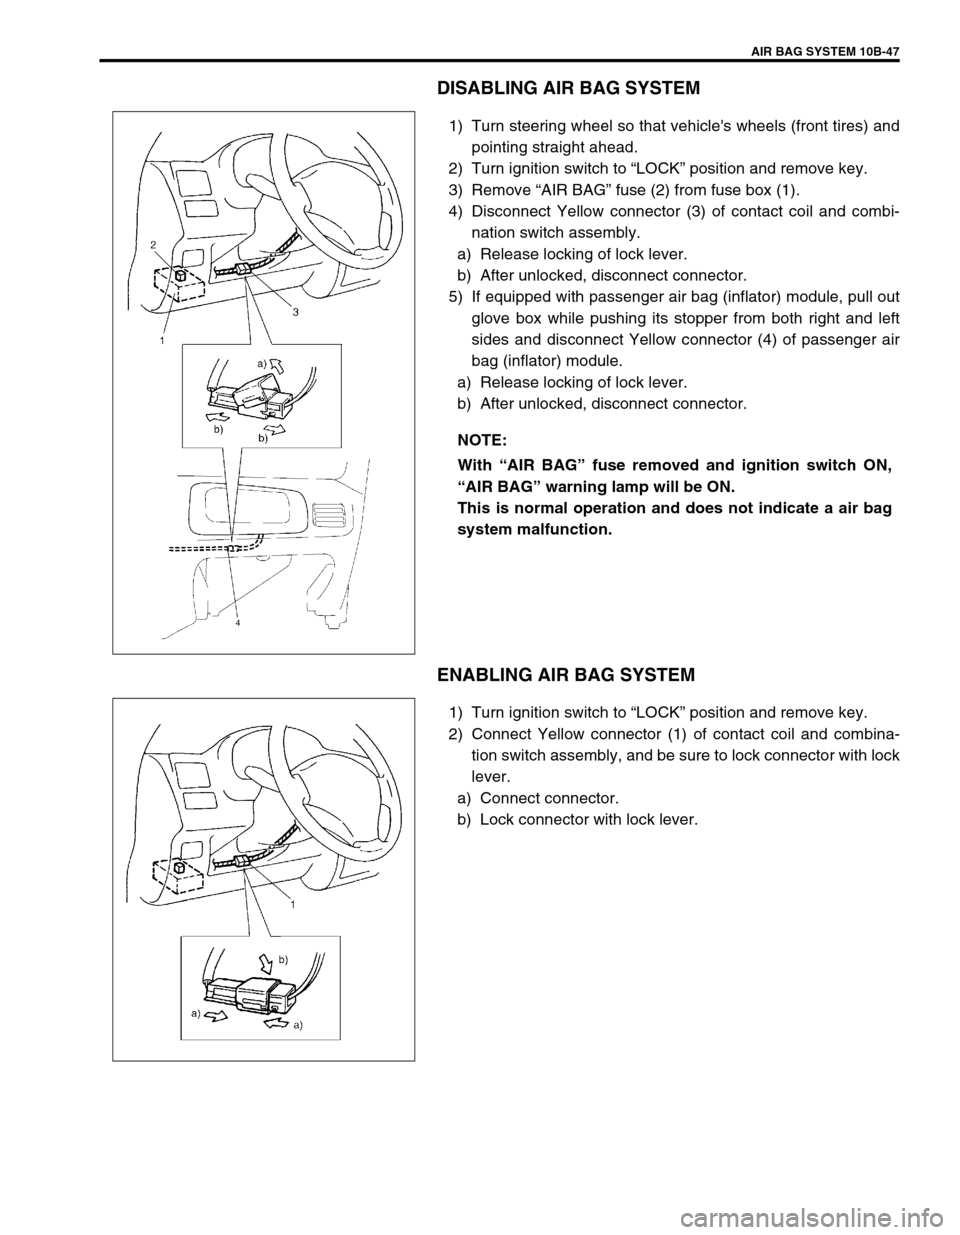 SUZUKI SWIFT 2000 1.G Transmission Service Workshop Manual AIR BAG SYSTEM 10B-47
DISABLING AIR BAG SYSTEM
1) Turn steering wheel so that vehicles wheels (front tires) and
pointing straight ahead.
2) Turn ignition switch to “LOCK” position and remove key.